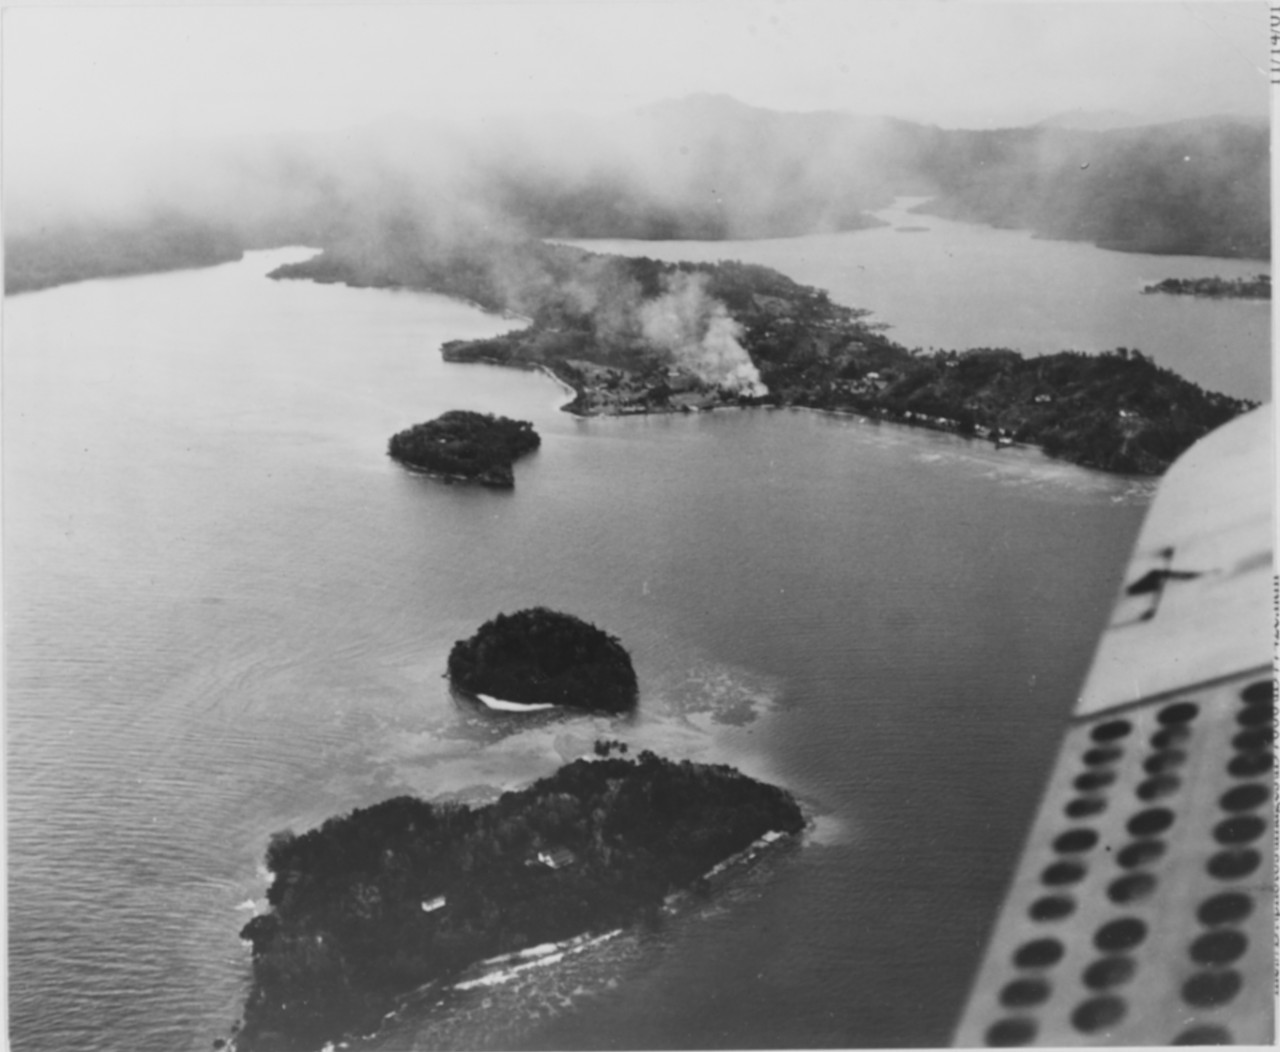 Photo #: NH 97742  Guadalcanal-Tulagi Operation, August 1942